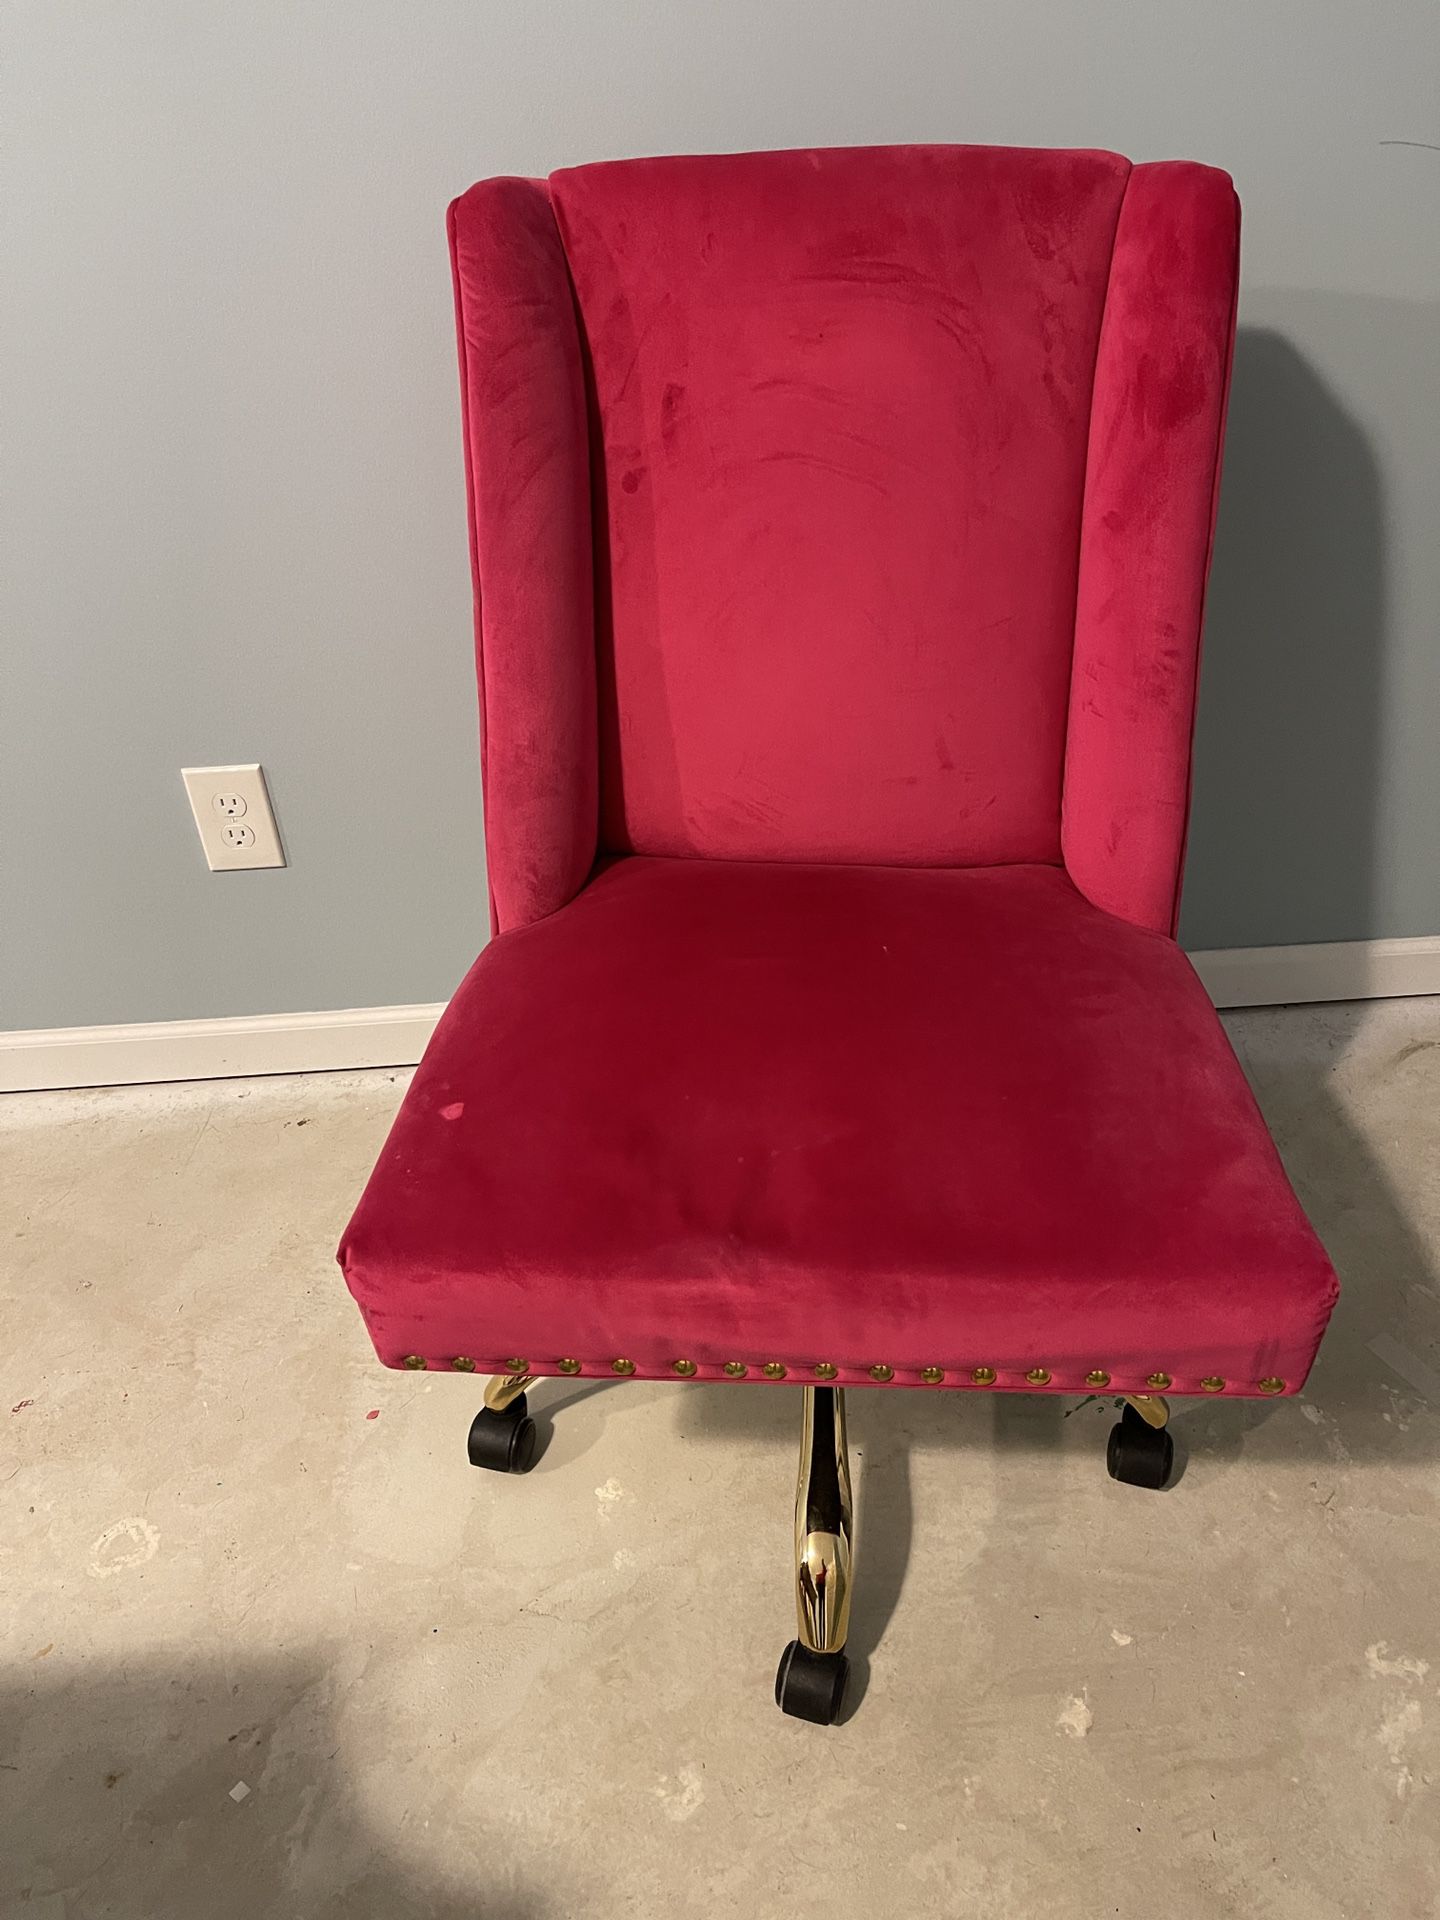 Hot Pink office Chair 